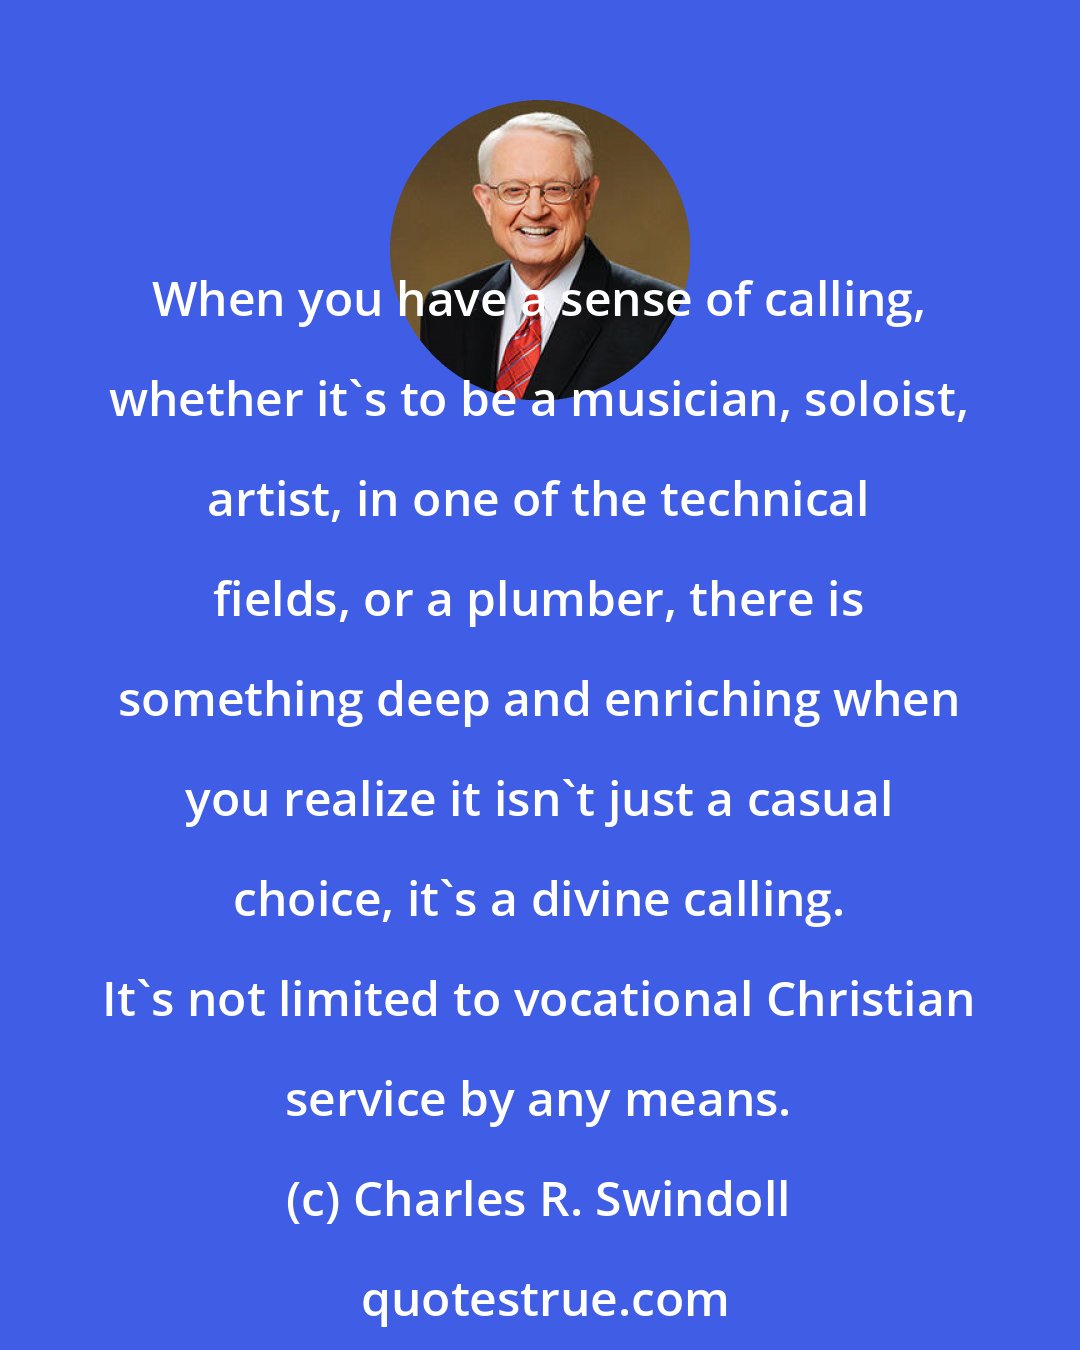 Charles R. Swindoll: When you have a sense of calling, whether it's to be a musician, soloist, artist, in one of the technical fields, or a plumber, there is something deep and enriching when you realize it isn't just a casual choice, it's a divine calling. It's not limited to vocational Christian service by any means.